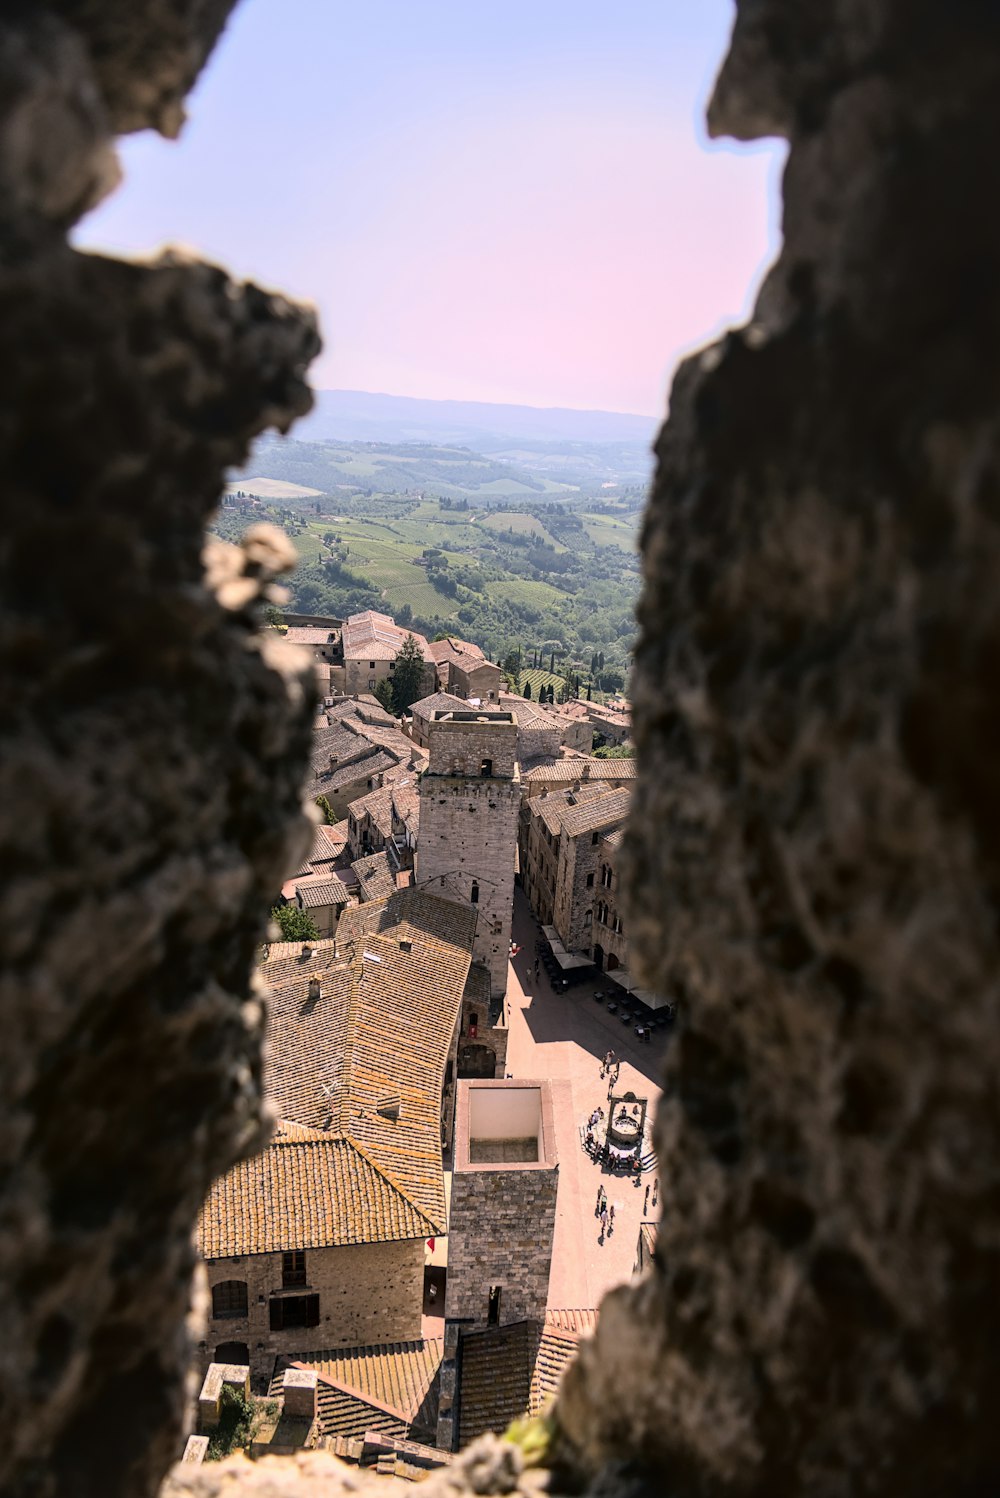 a view of a town through a hole in a rock wall